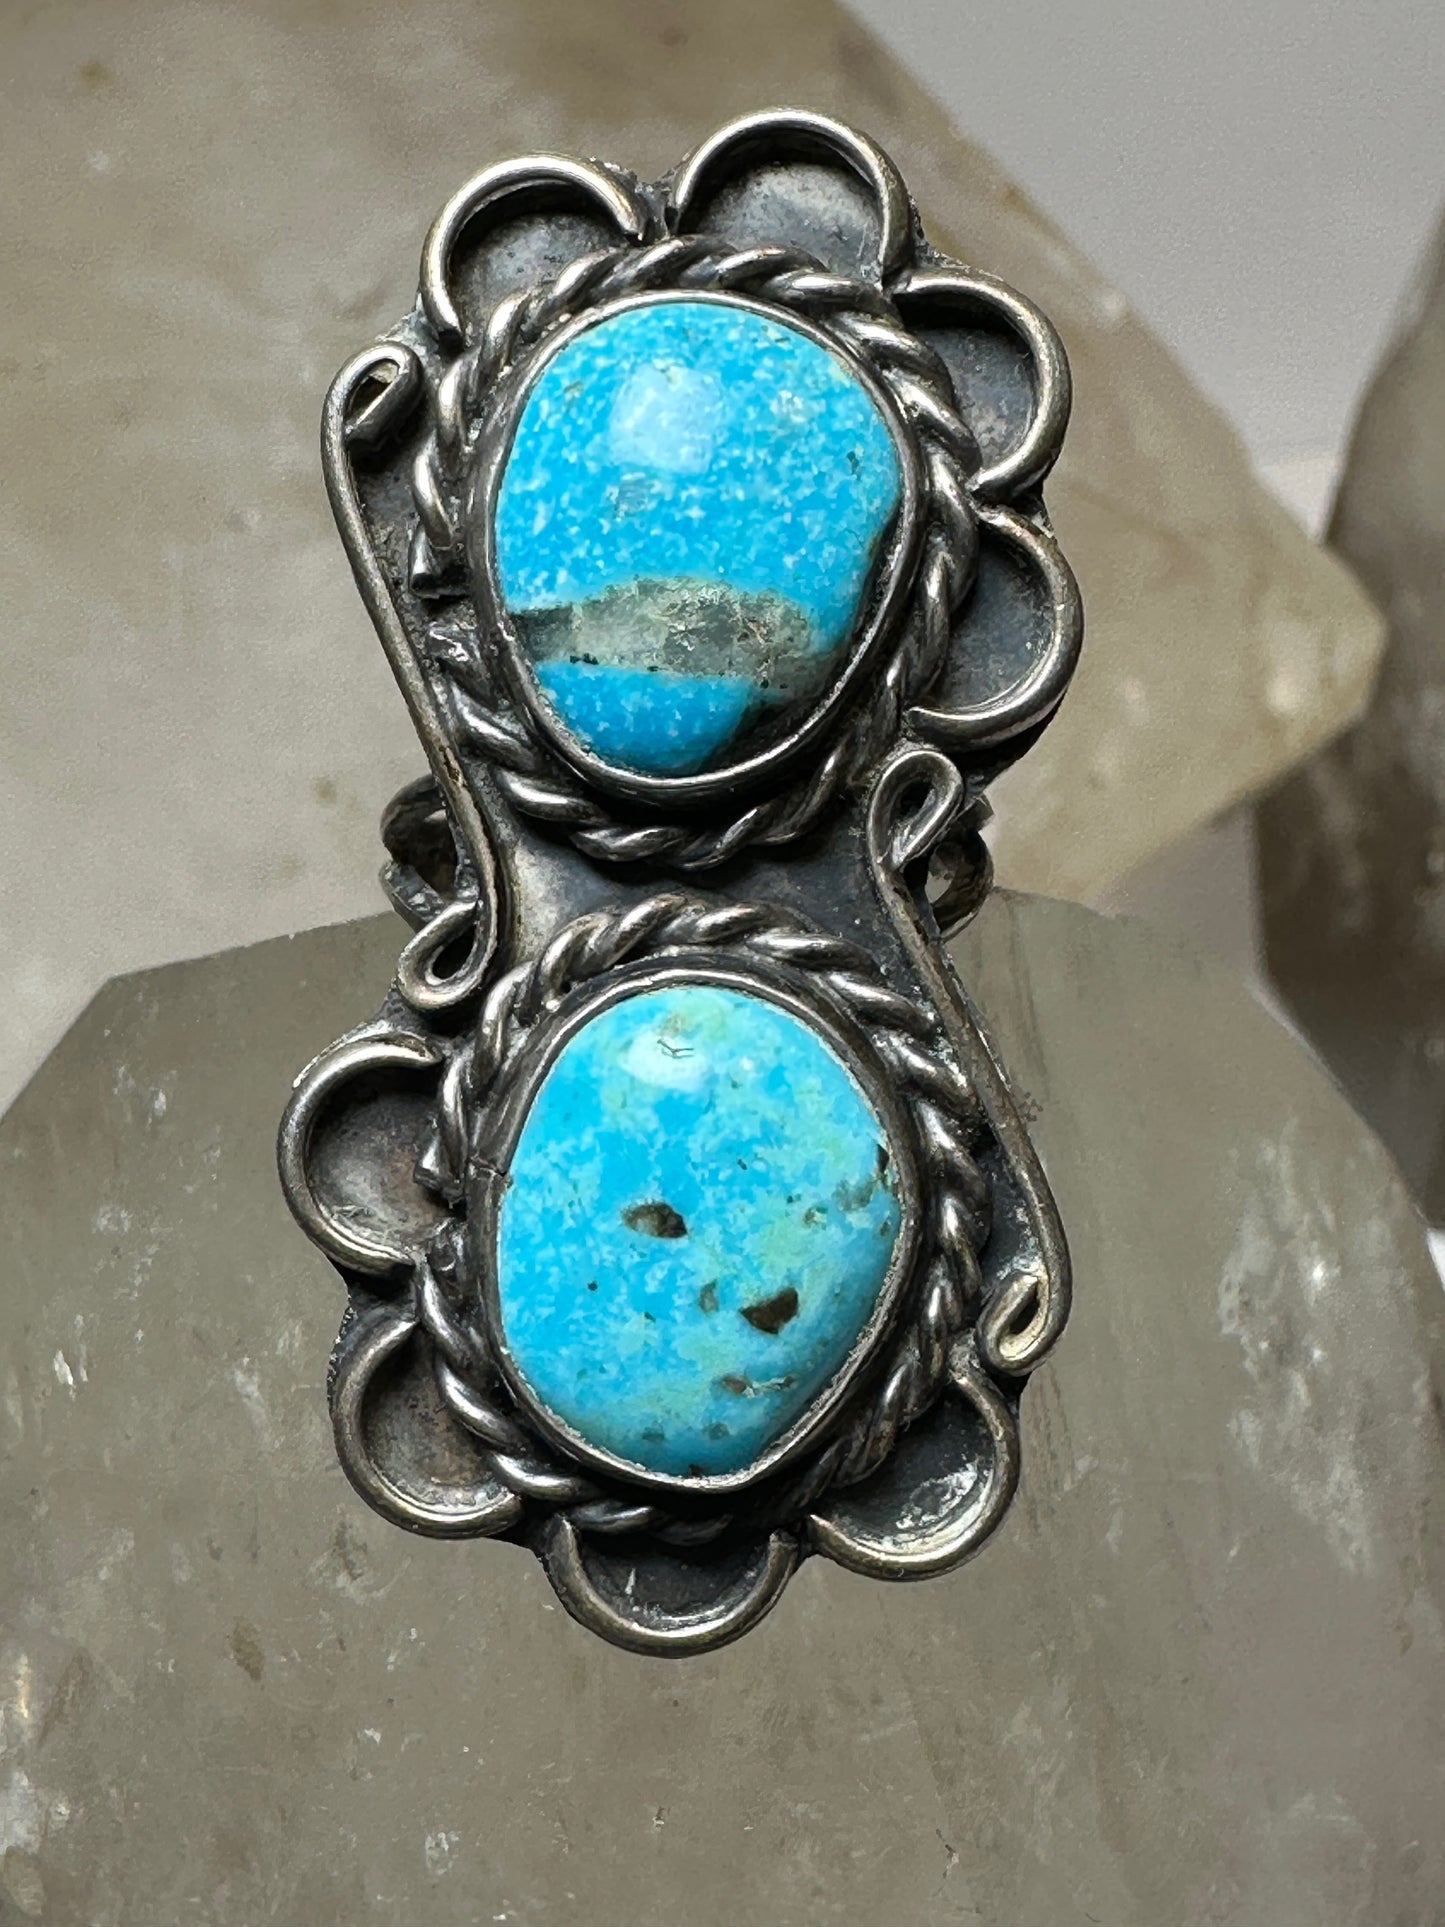 Turquoise ring size 6 long Navajo southwest sterling silver women